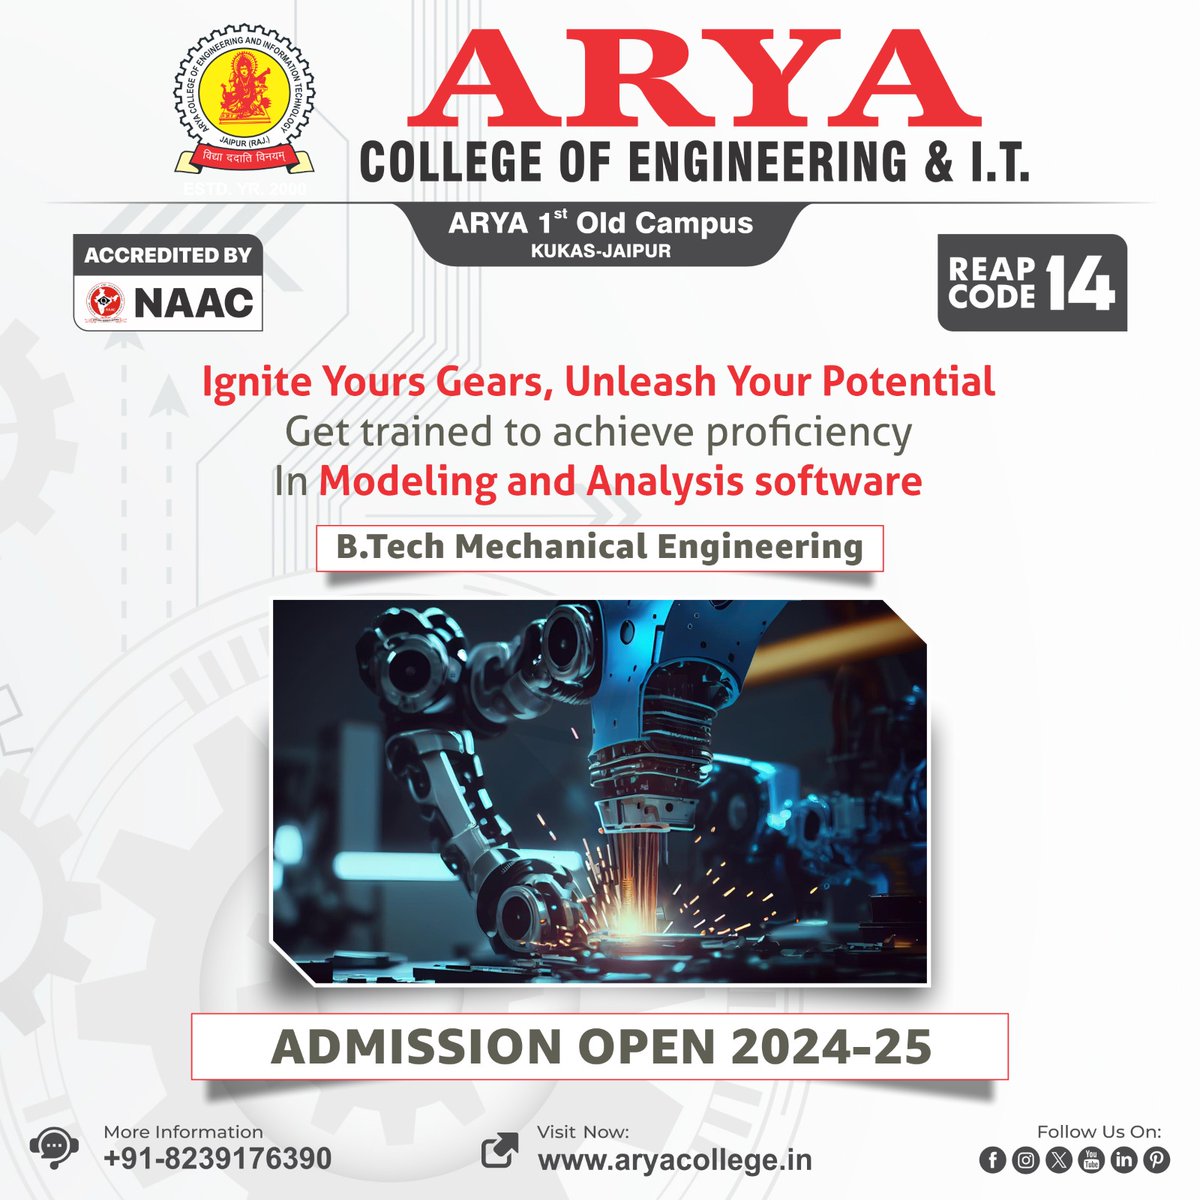 Unlock your potential in #BTech #MechanicalEngineering with our cutting-edge curriculum focused on modeling & analysis software. Ignite your gears as you delve into  the world of mechanical design & innovation. #AdmissionsOpen2024 to embark on a journey of proficiency & expertise